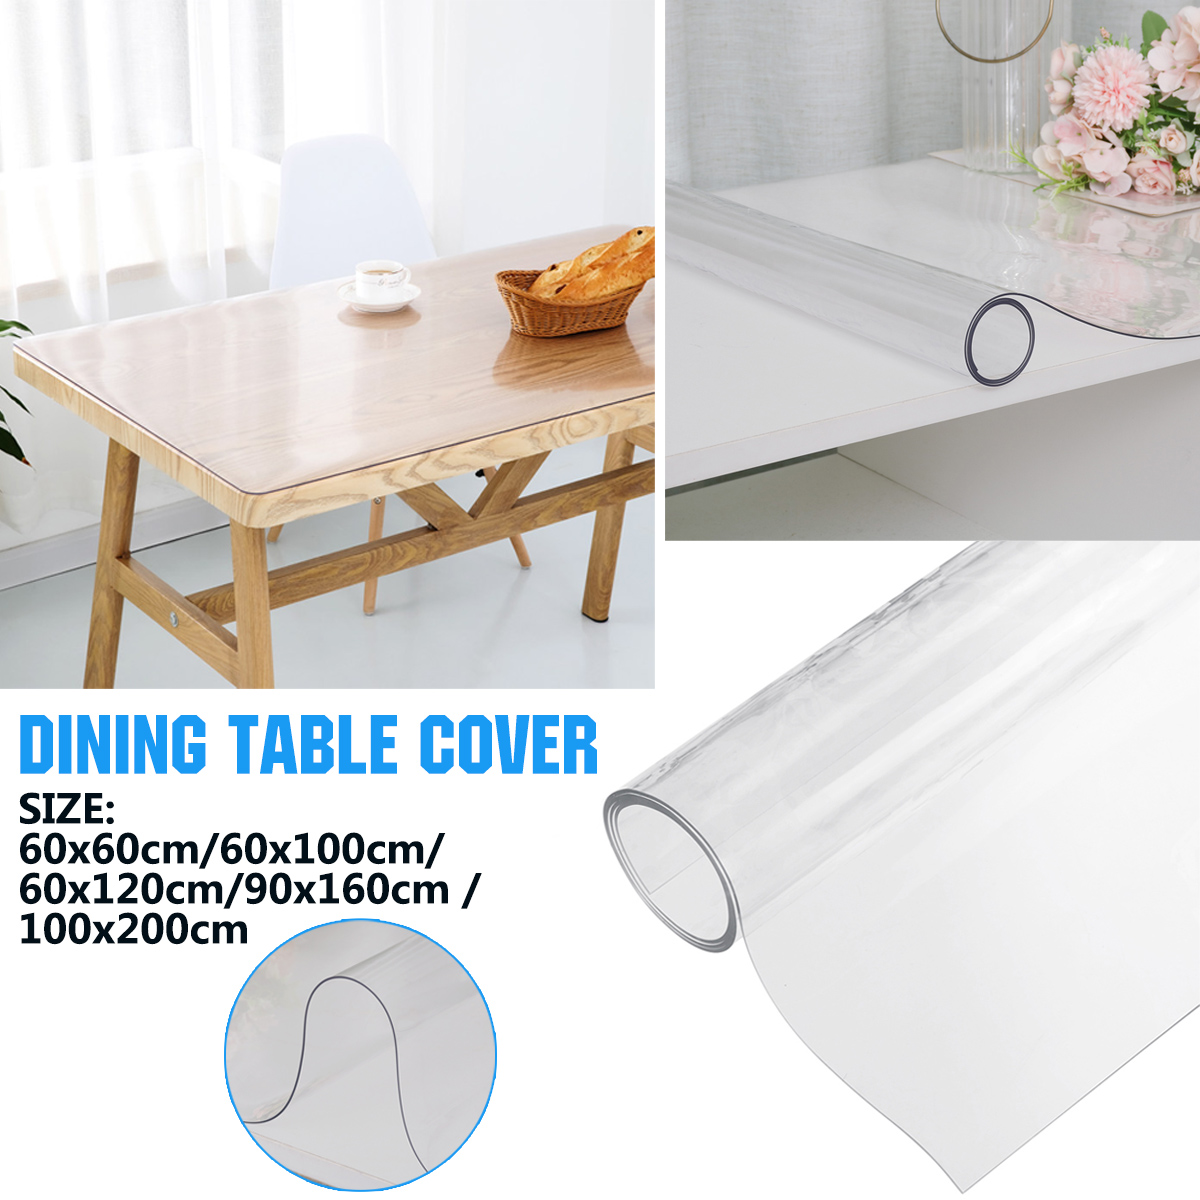 15mm-Thickness-Clear-Plastic-PVC-Tablecloth-Transparent-Non-Stick-Waterproof-Protector-Dining-Table--1882391-4